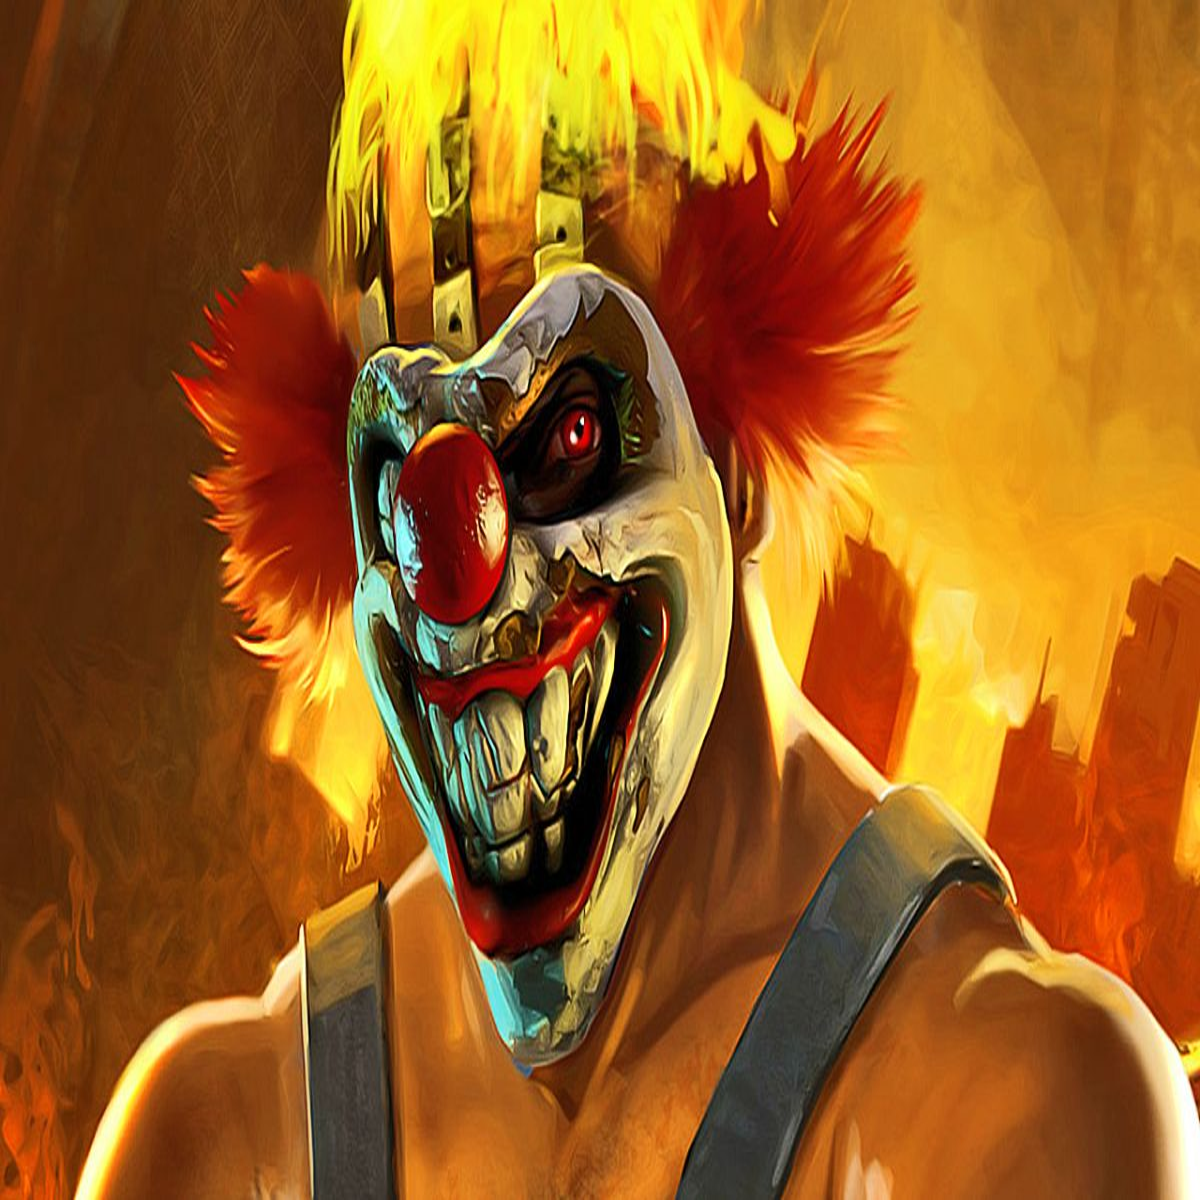 Sweet Tooth mask, Twisted Metal series games